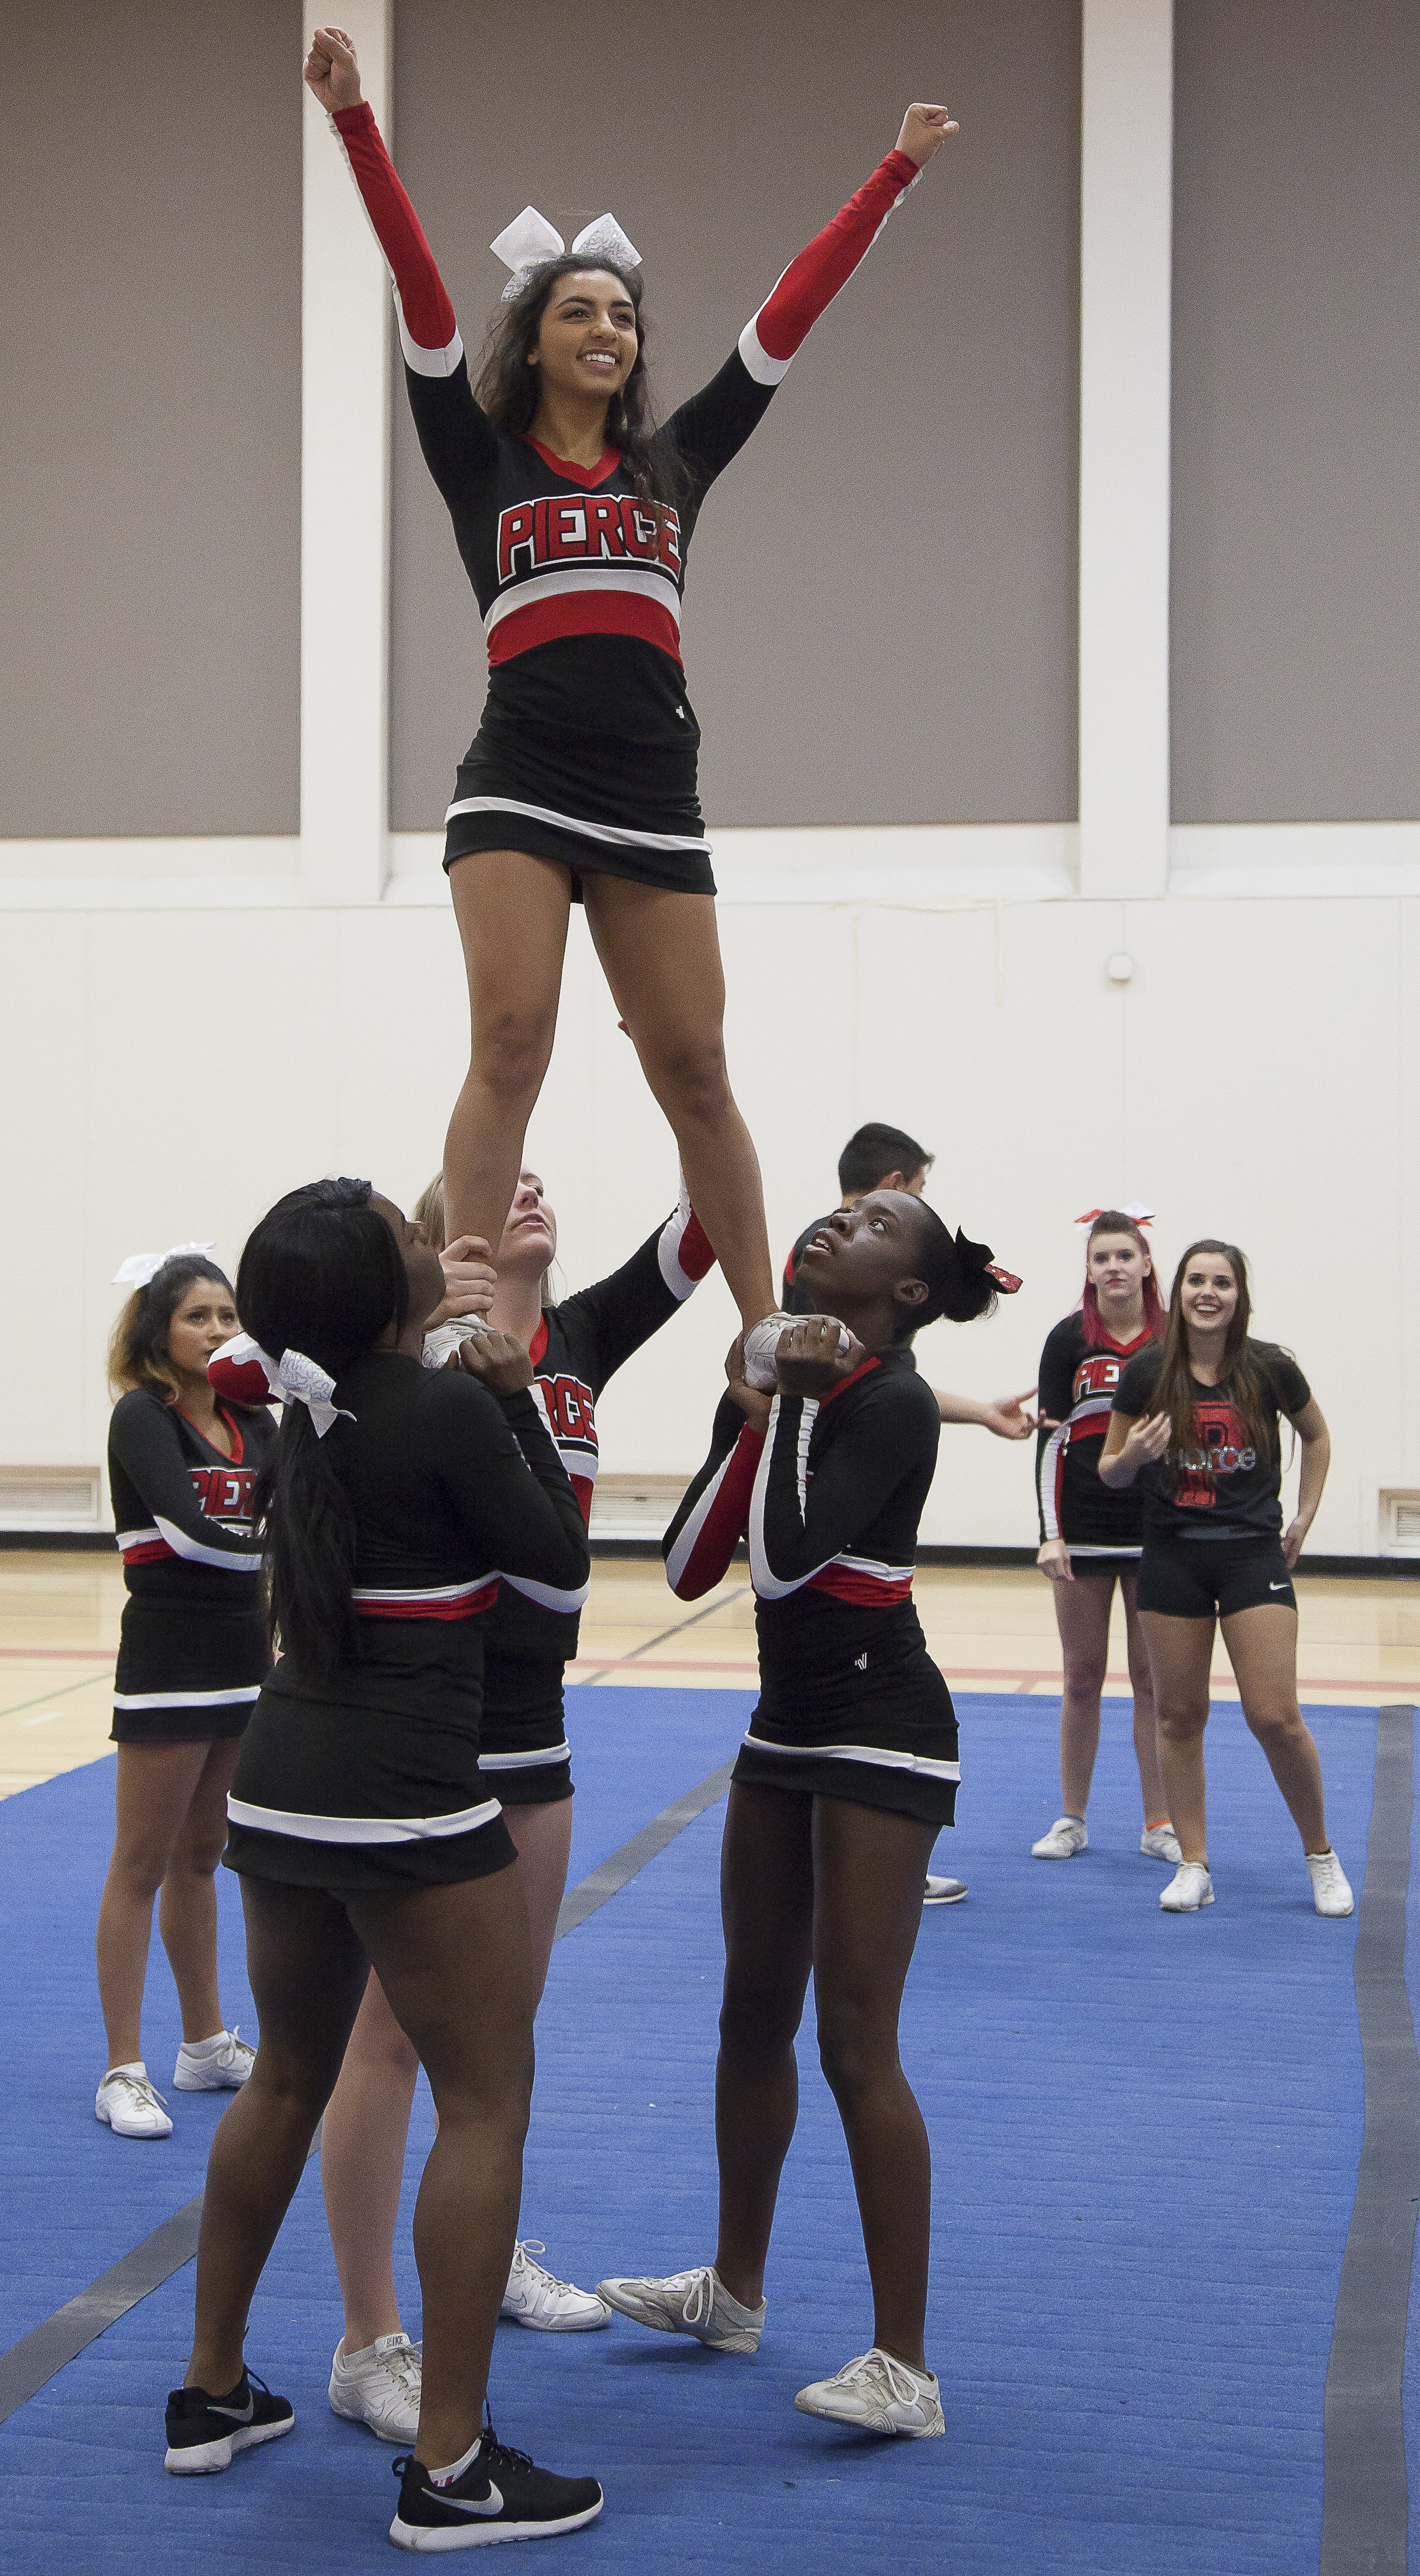  Amanda Perez, top, is lifted by fellow team members while other members watch inside the North Gym on Sunday March 1, 2015. Woodland Hills, Calif.  Read the full story&nbsp; here  